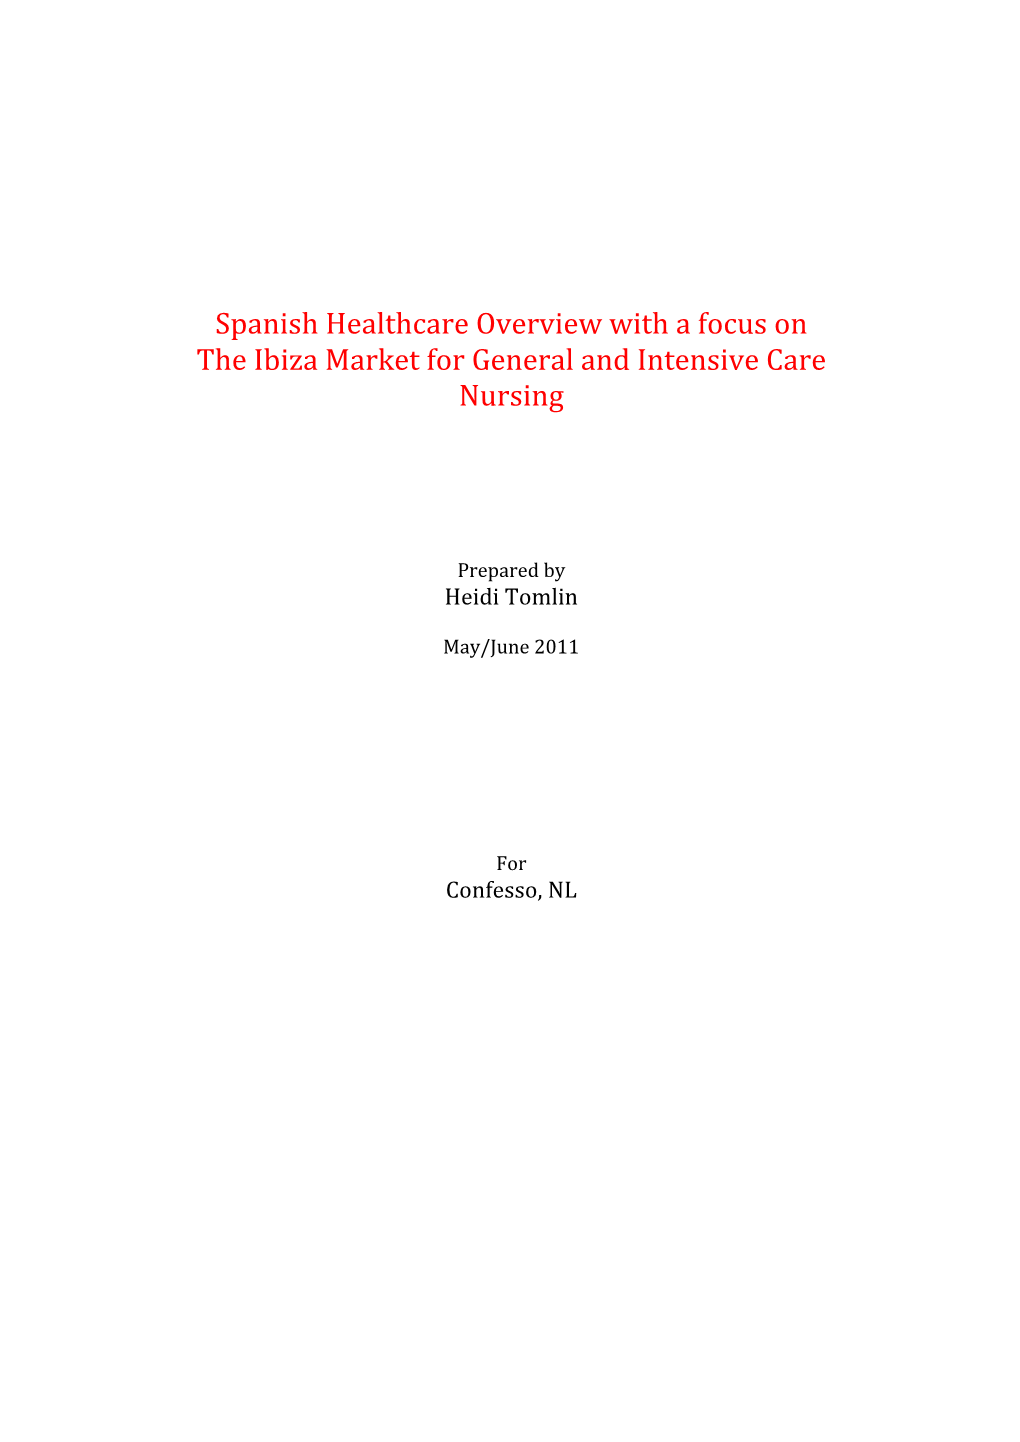 Spanish Healthcare Overview with a Focus on the Ibiza Market for General and Intensive Care Nursing